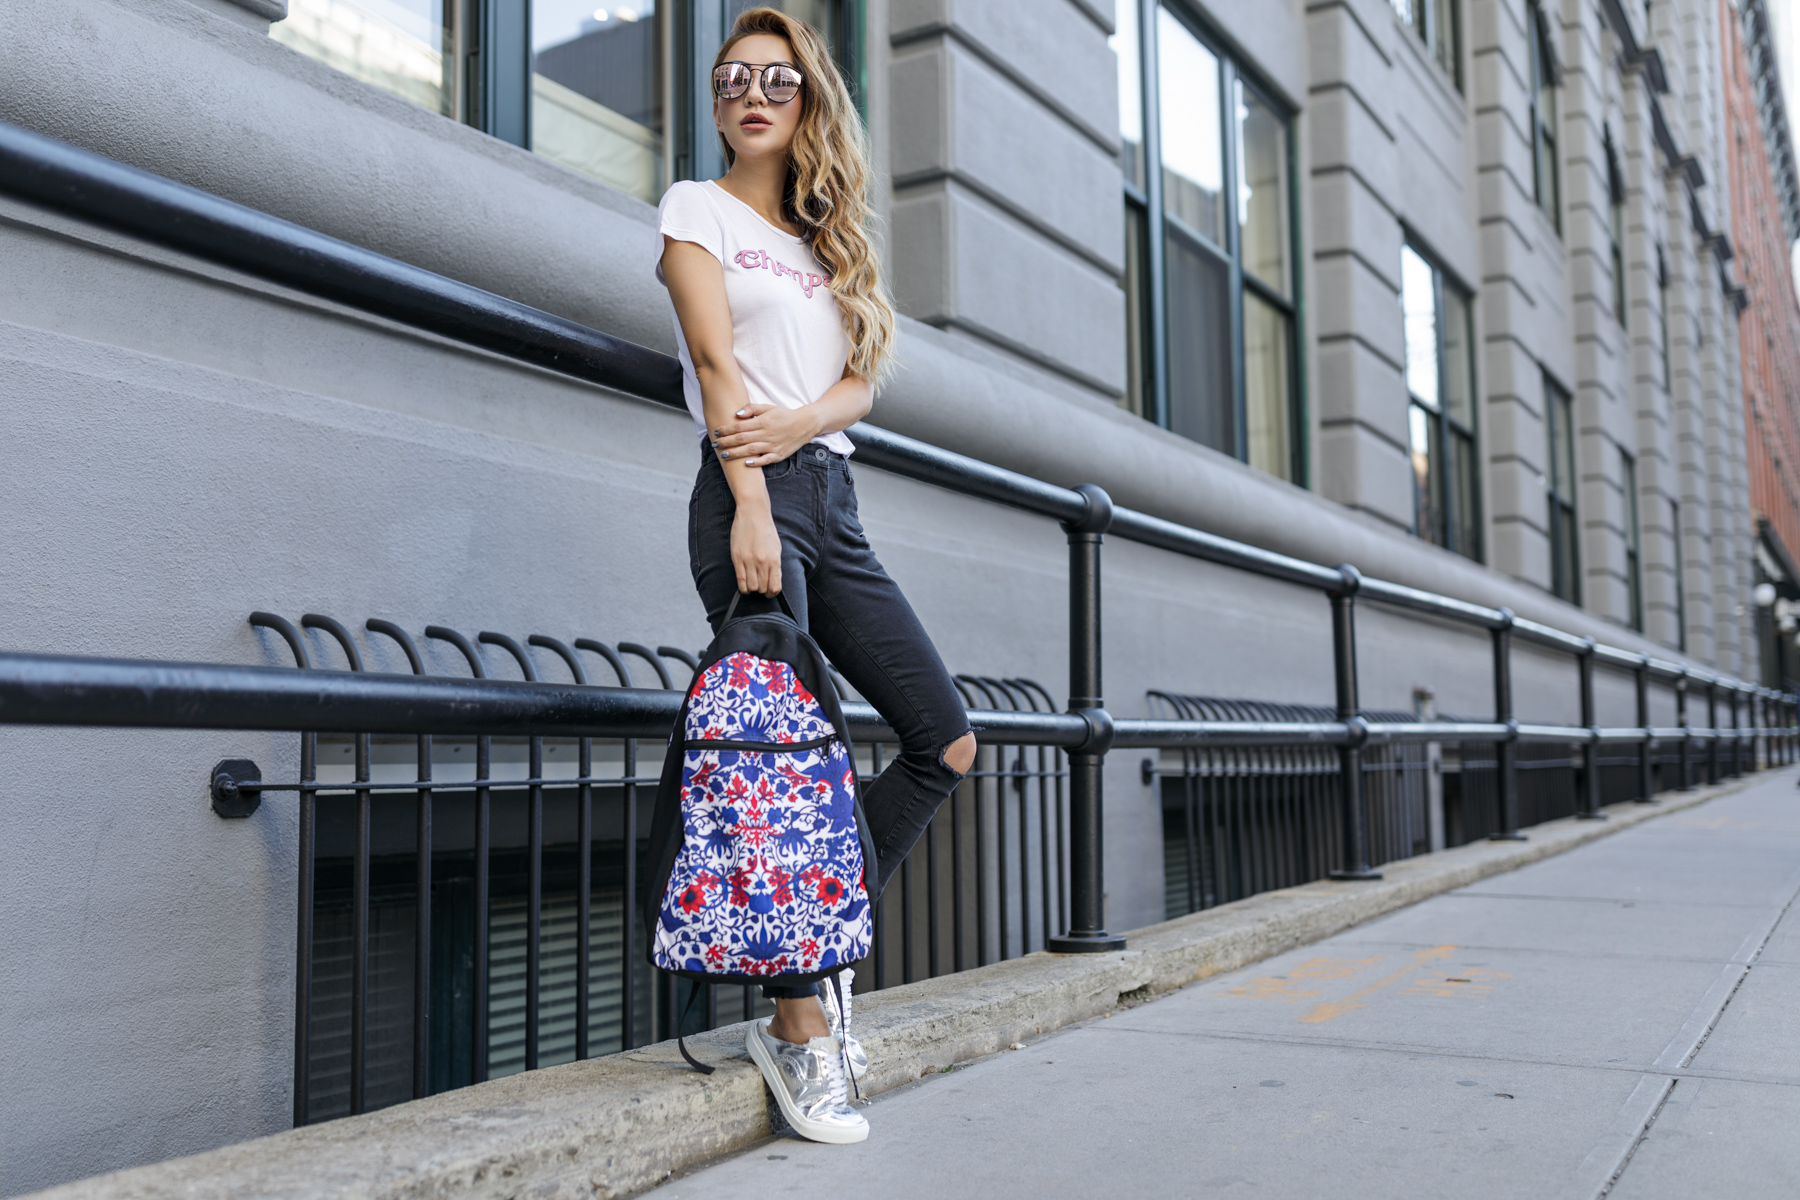 eBay, Backpack, Exclusive, Floral Paisley Print, Rachel Zoe, NOTJESSFASHION, NYC, Top Fashion Blogger, Lifestyle Blogger, Travel Blogger